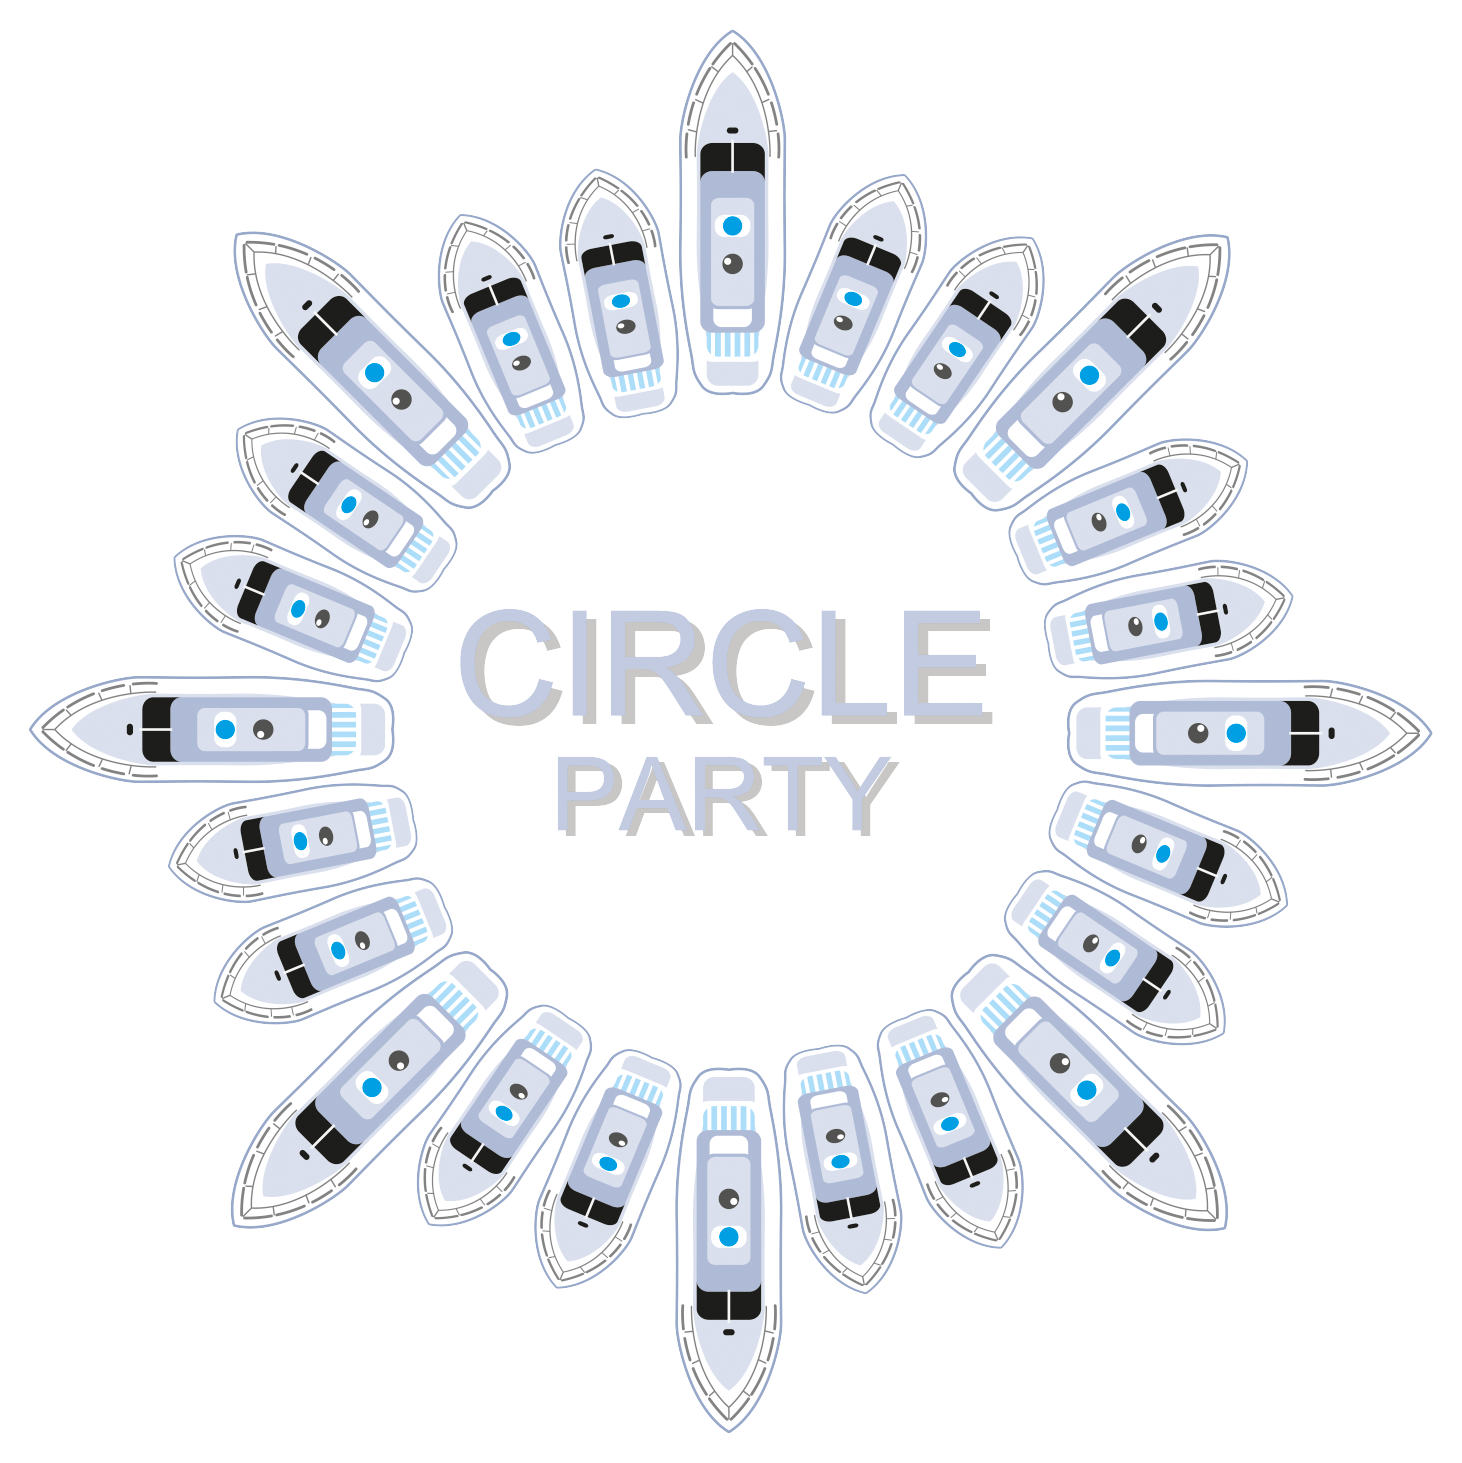 The Circle Party